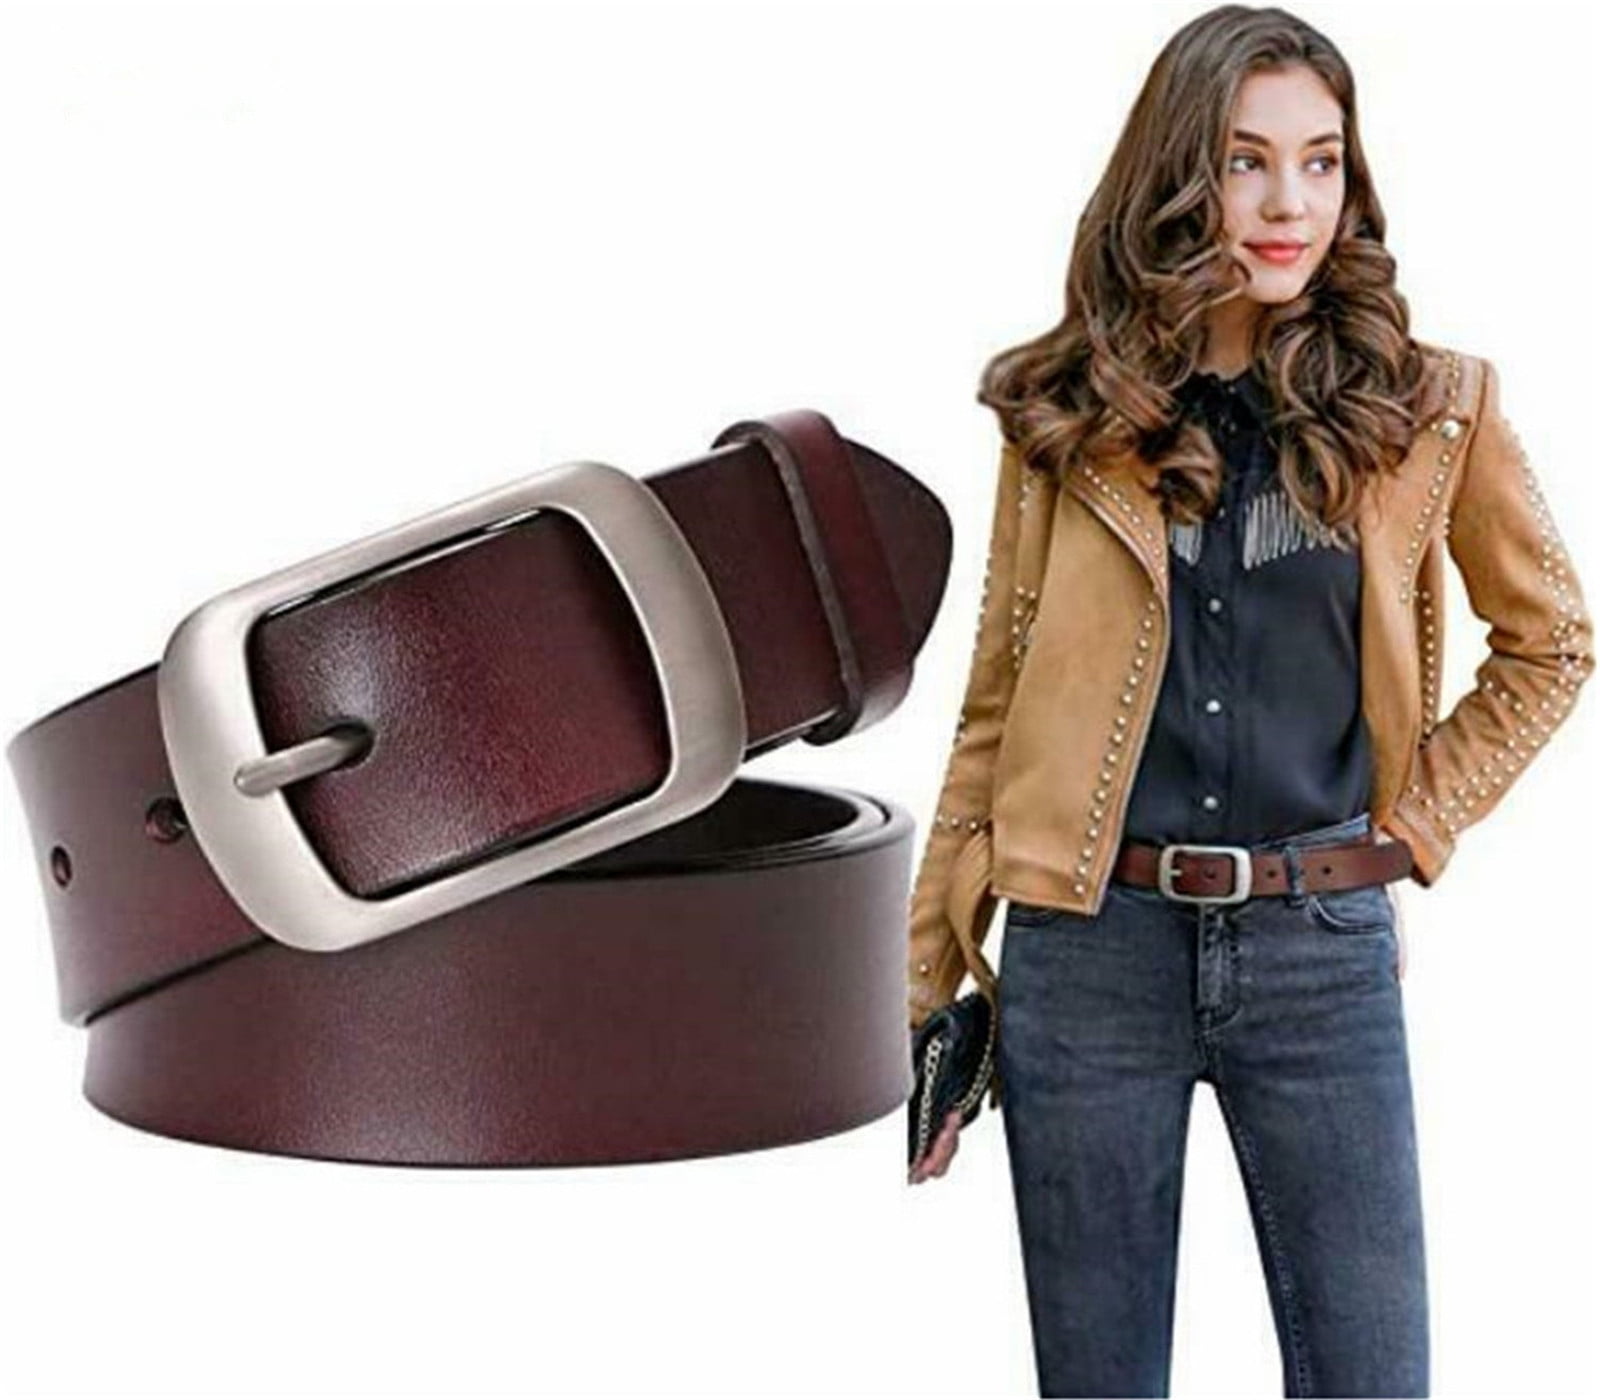 Women Solid Color PU Leather Pin Belt Buckle Waistband Adjustable Jeans Belt Cloth Great Lovely Novelty Coffee 